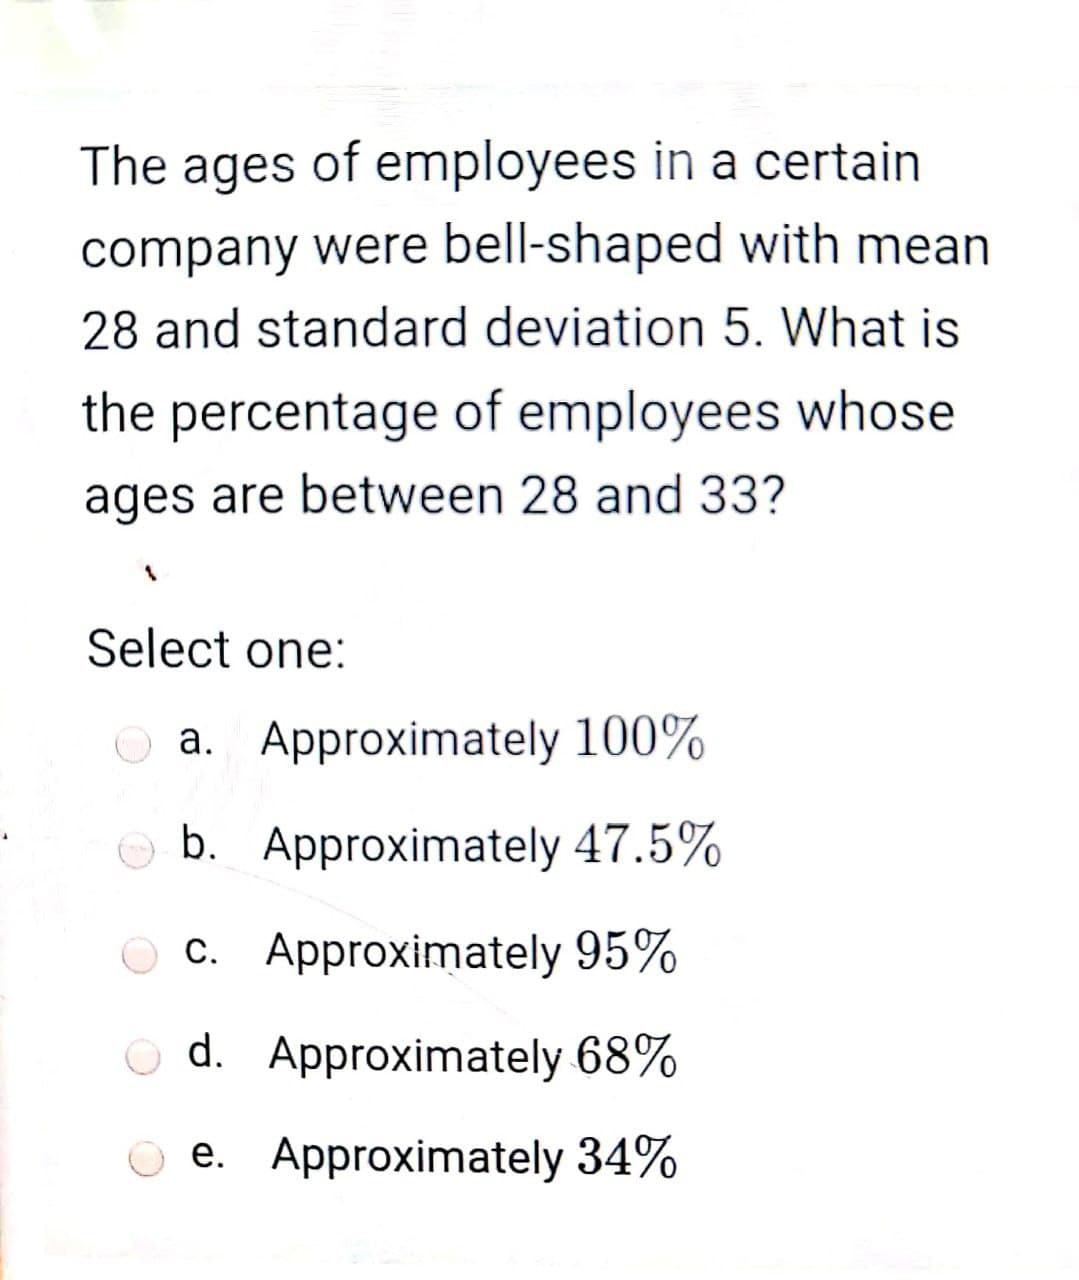 The ages of employees in a certain
company were bell-shaped with mean
28 and standard deviation 5. What is
the percentage of employees whose
ages are between 28 and 33?
Select one:
O a. Approximately 100%
b. Approximately 47.5%
c. Approximately 95%
O d. Approximately 68%
e. Approximately 34%
